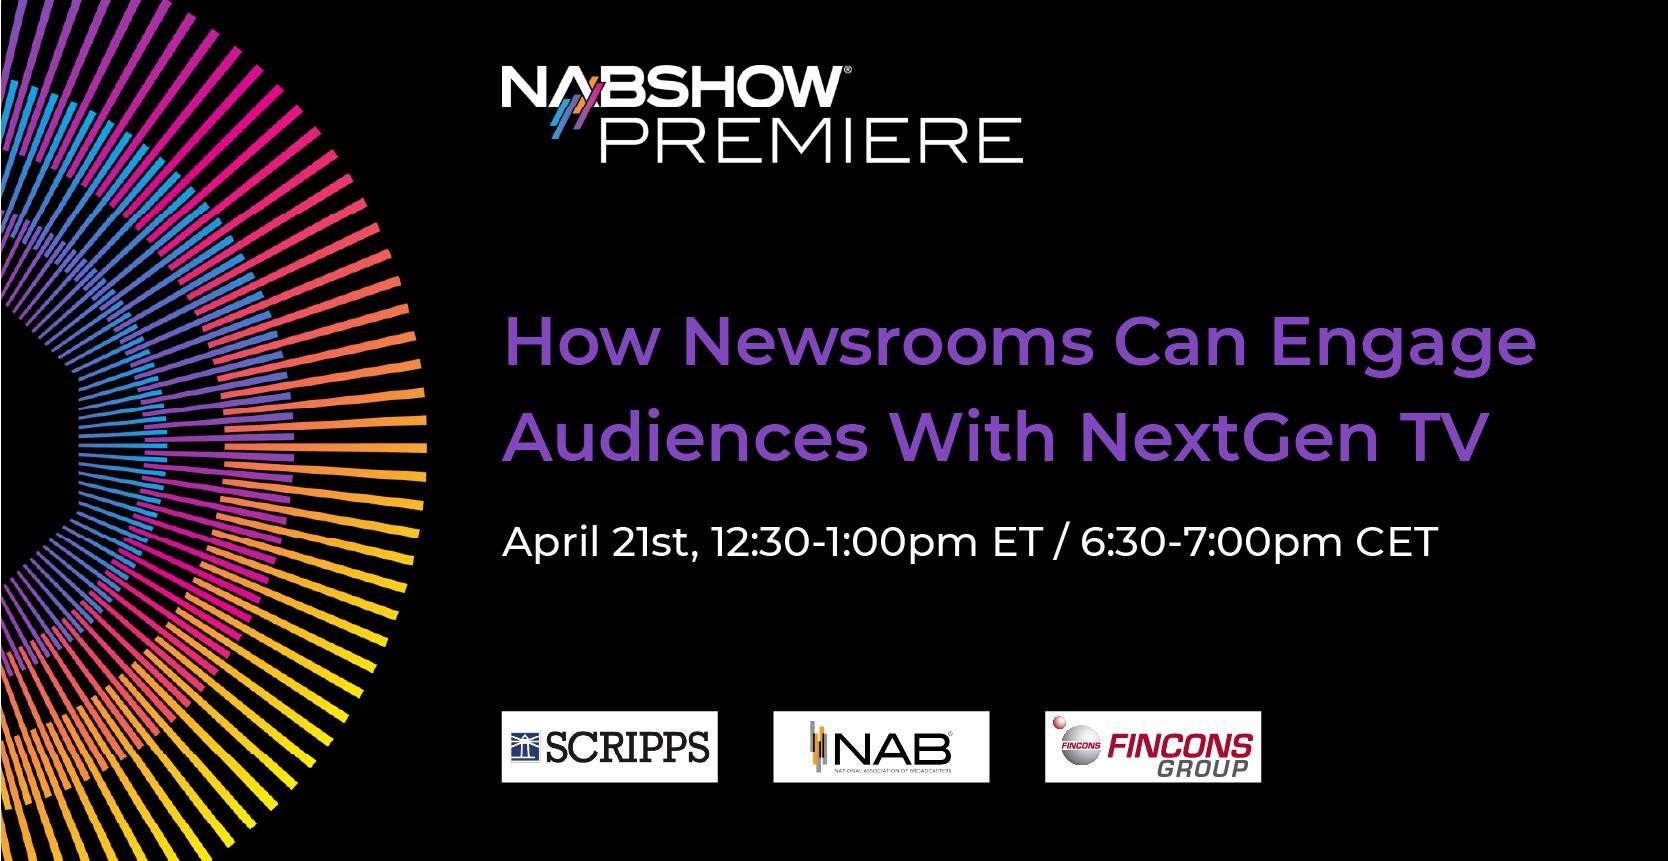 Learn how to detect fake news during our session at the NAB Show Premiere